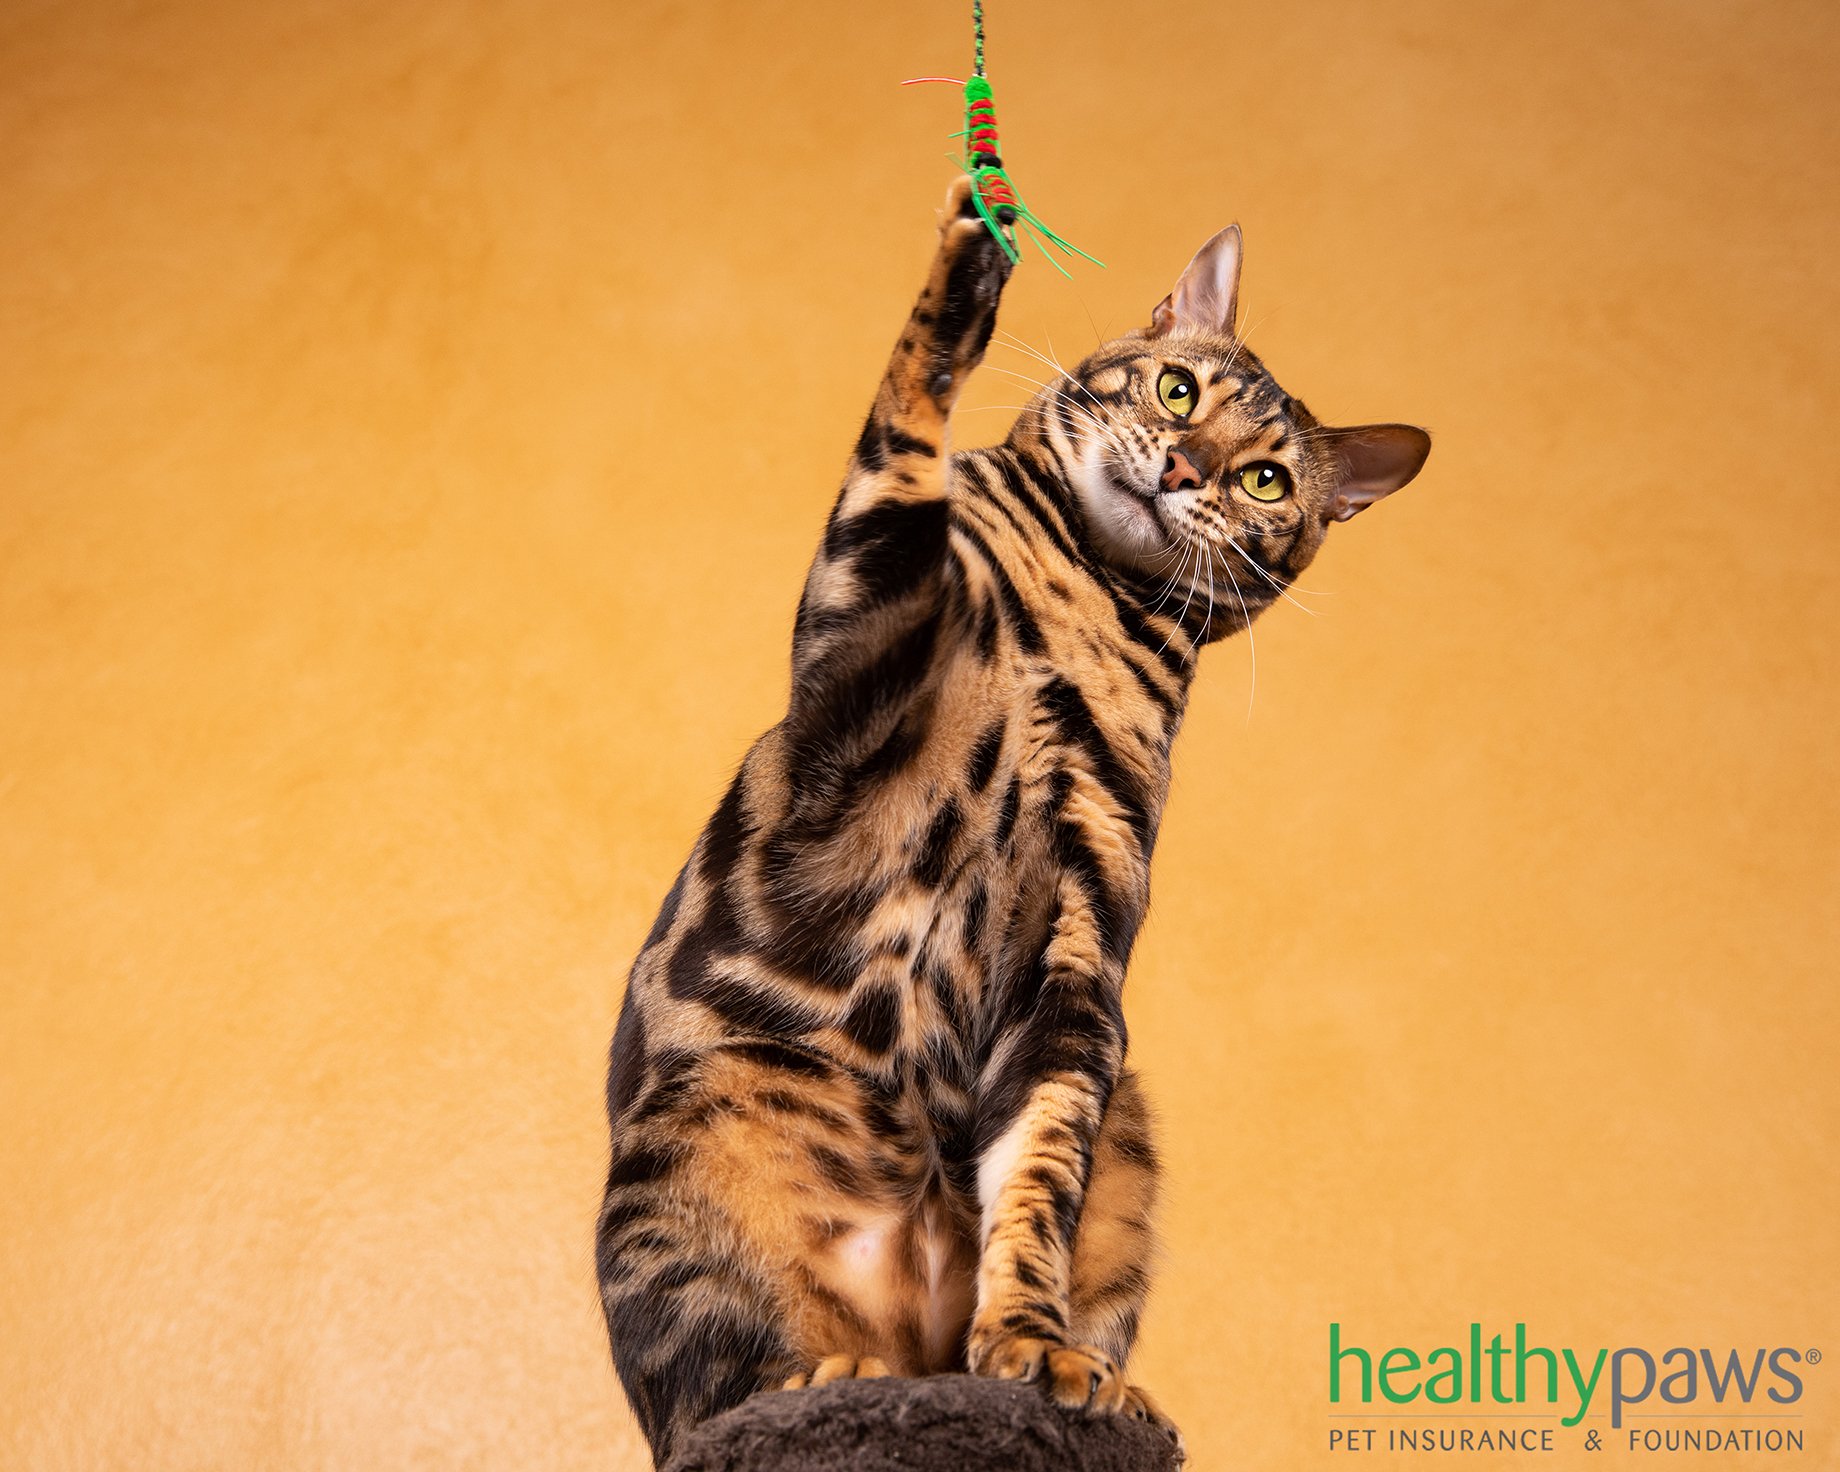 Cat photographed by Mark Rodgers for Healthy Paws.